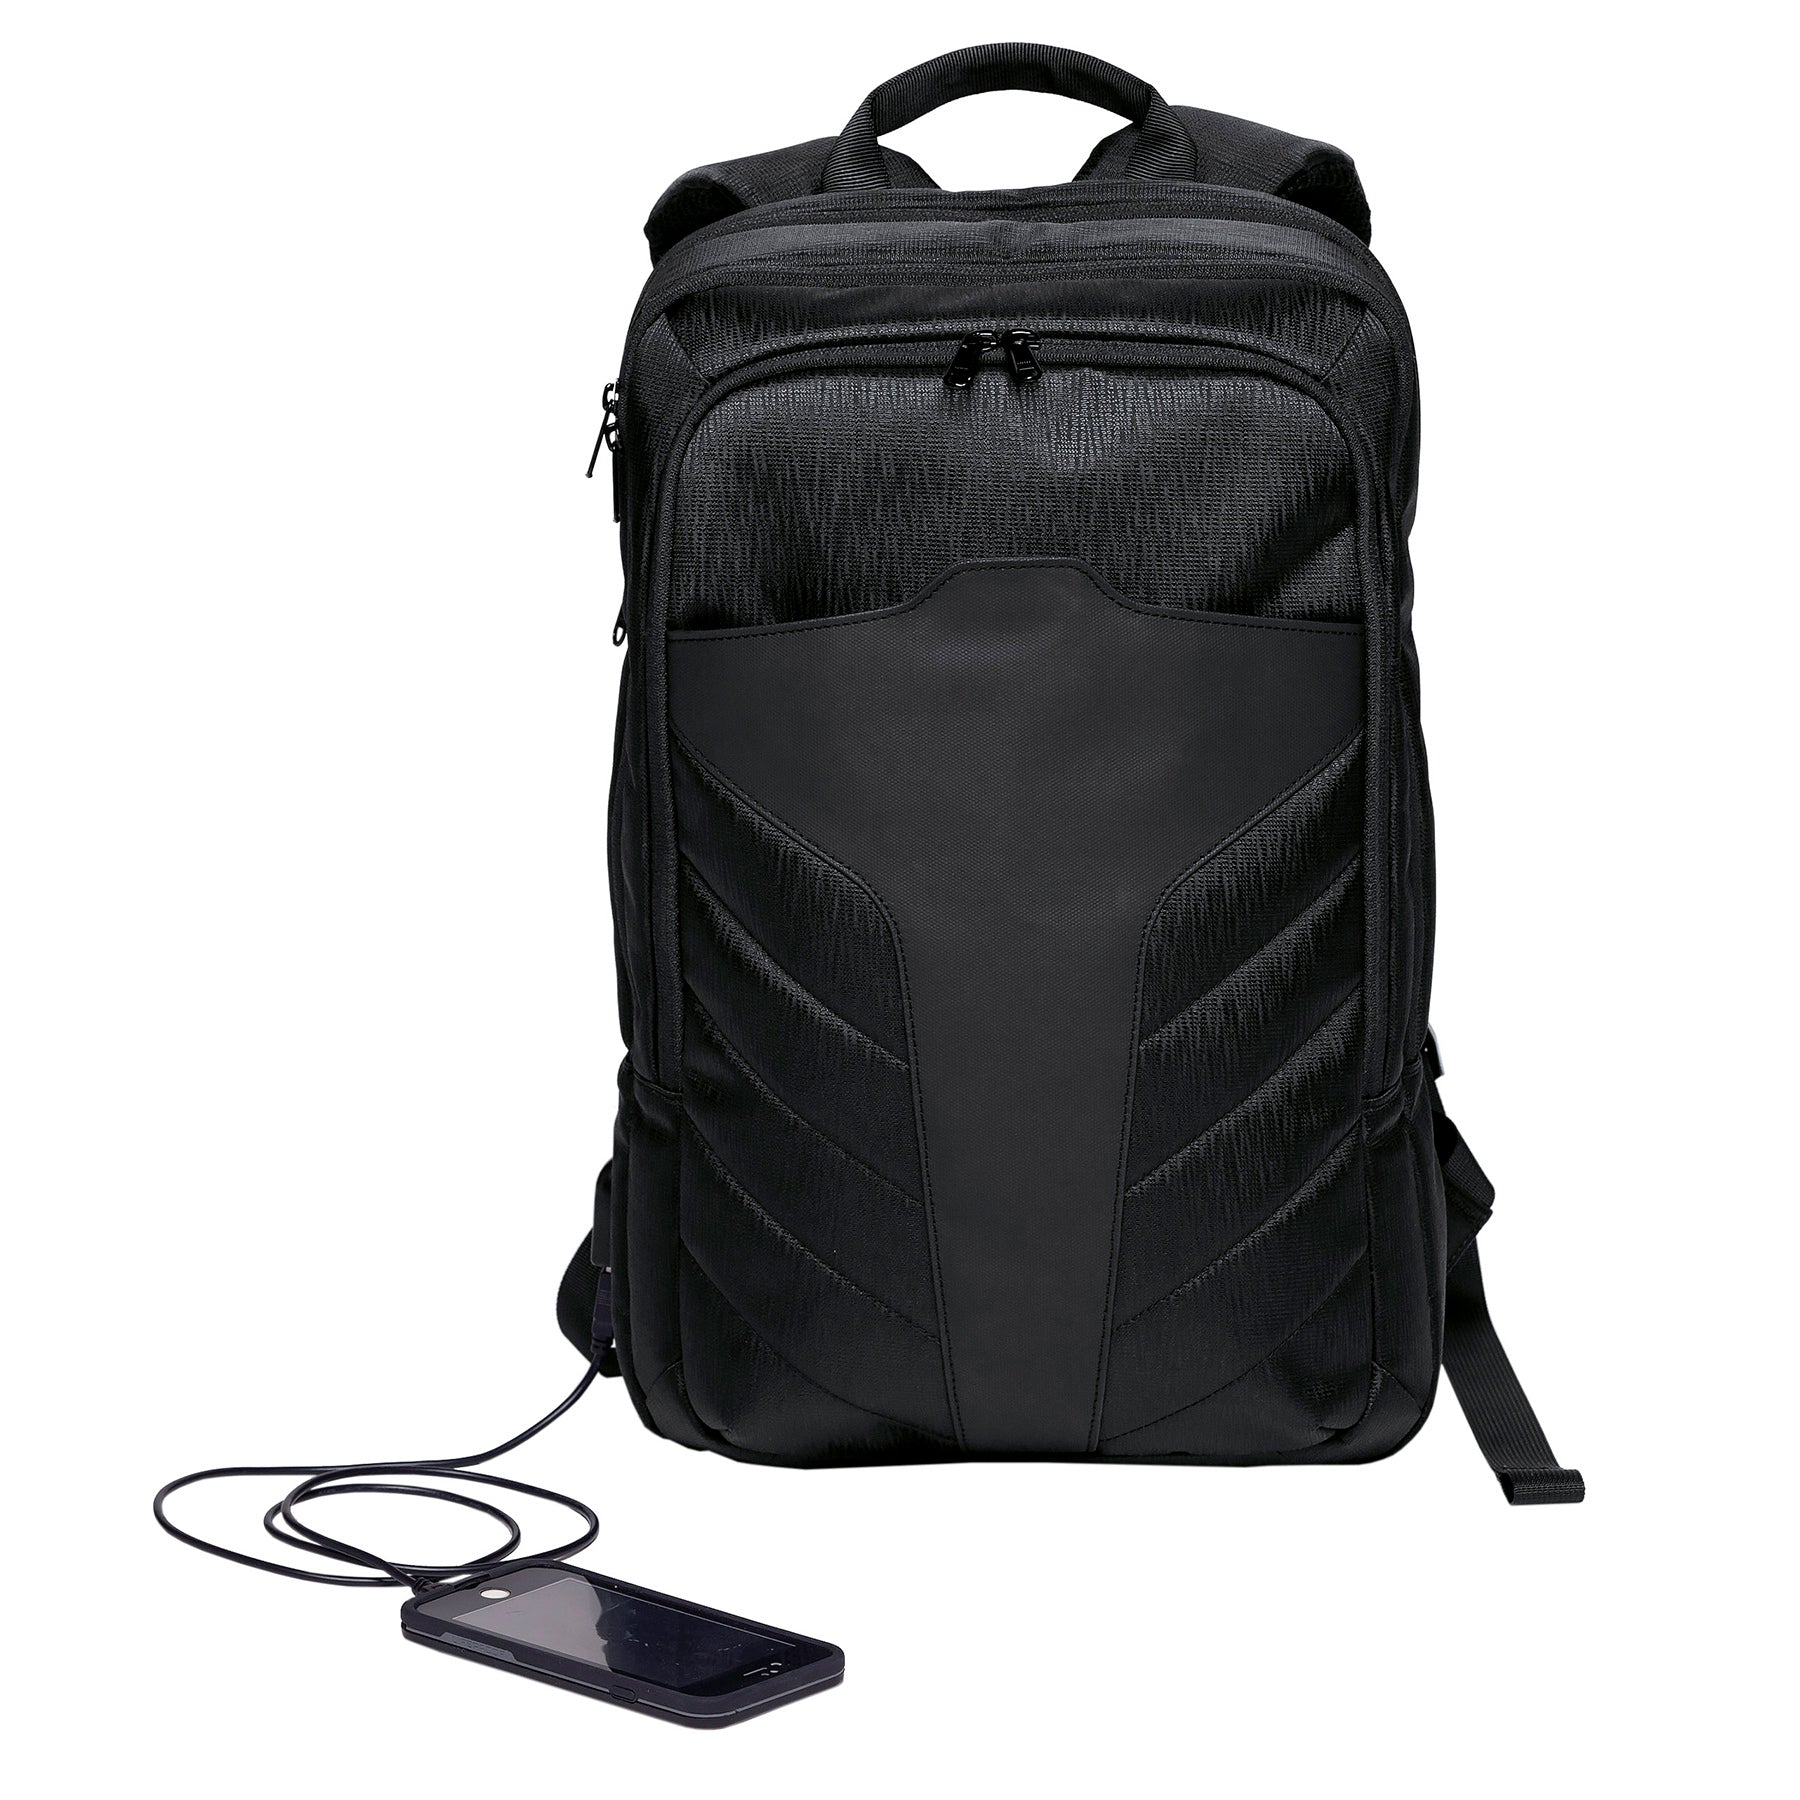 House of Uniforms The Portal Compu Backpack Gear for Life Black